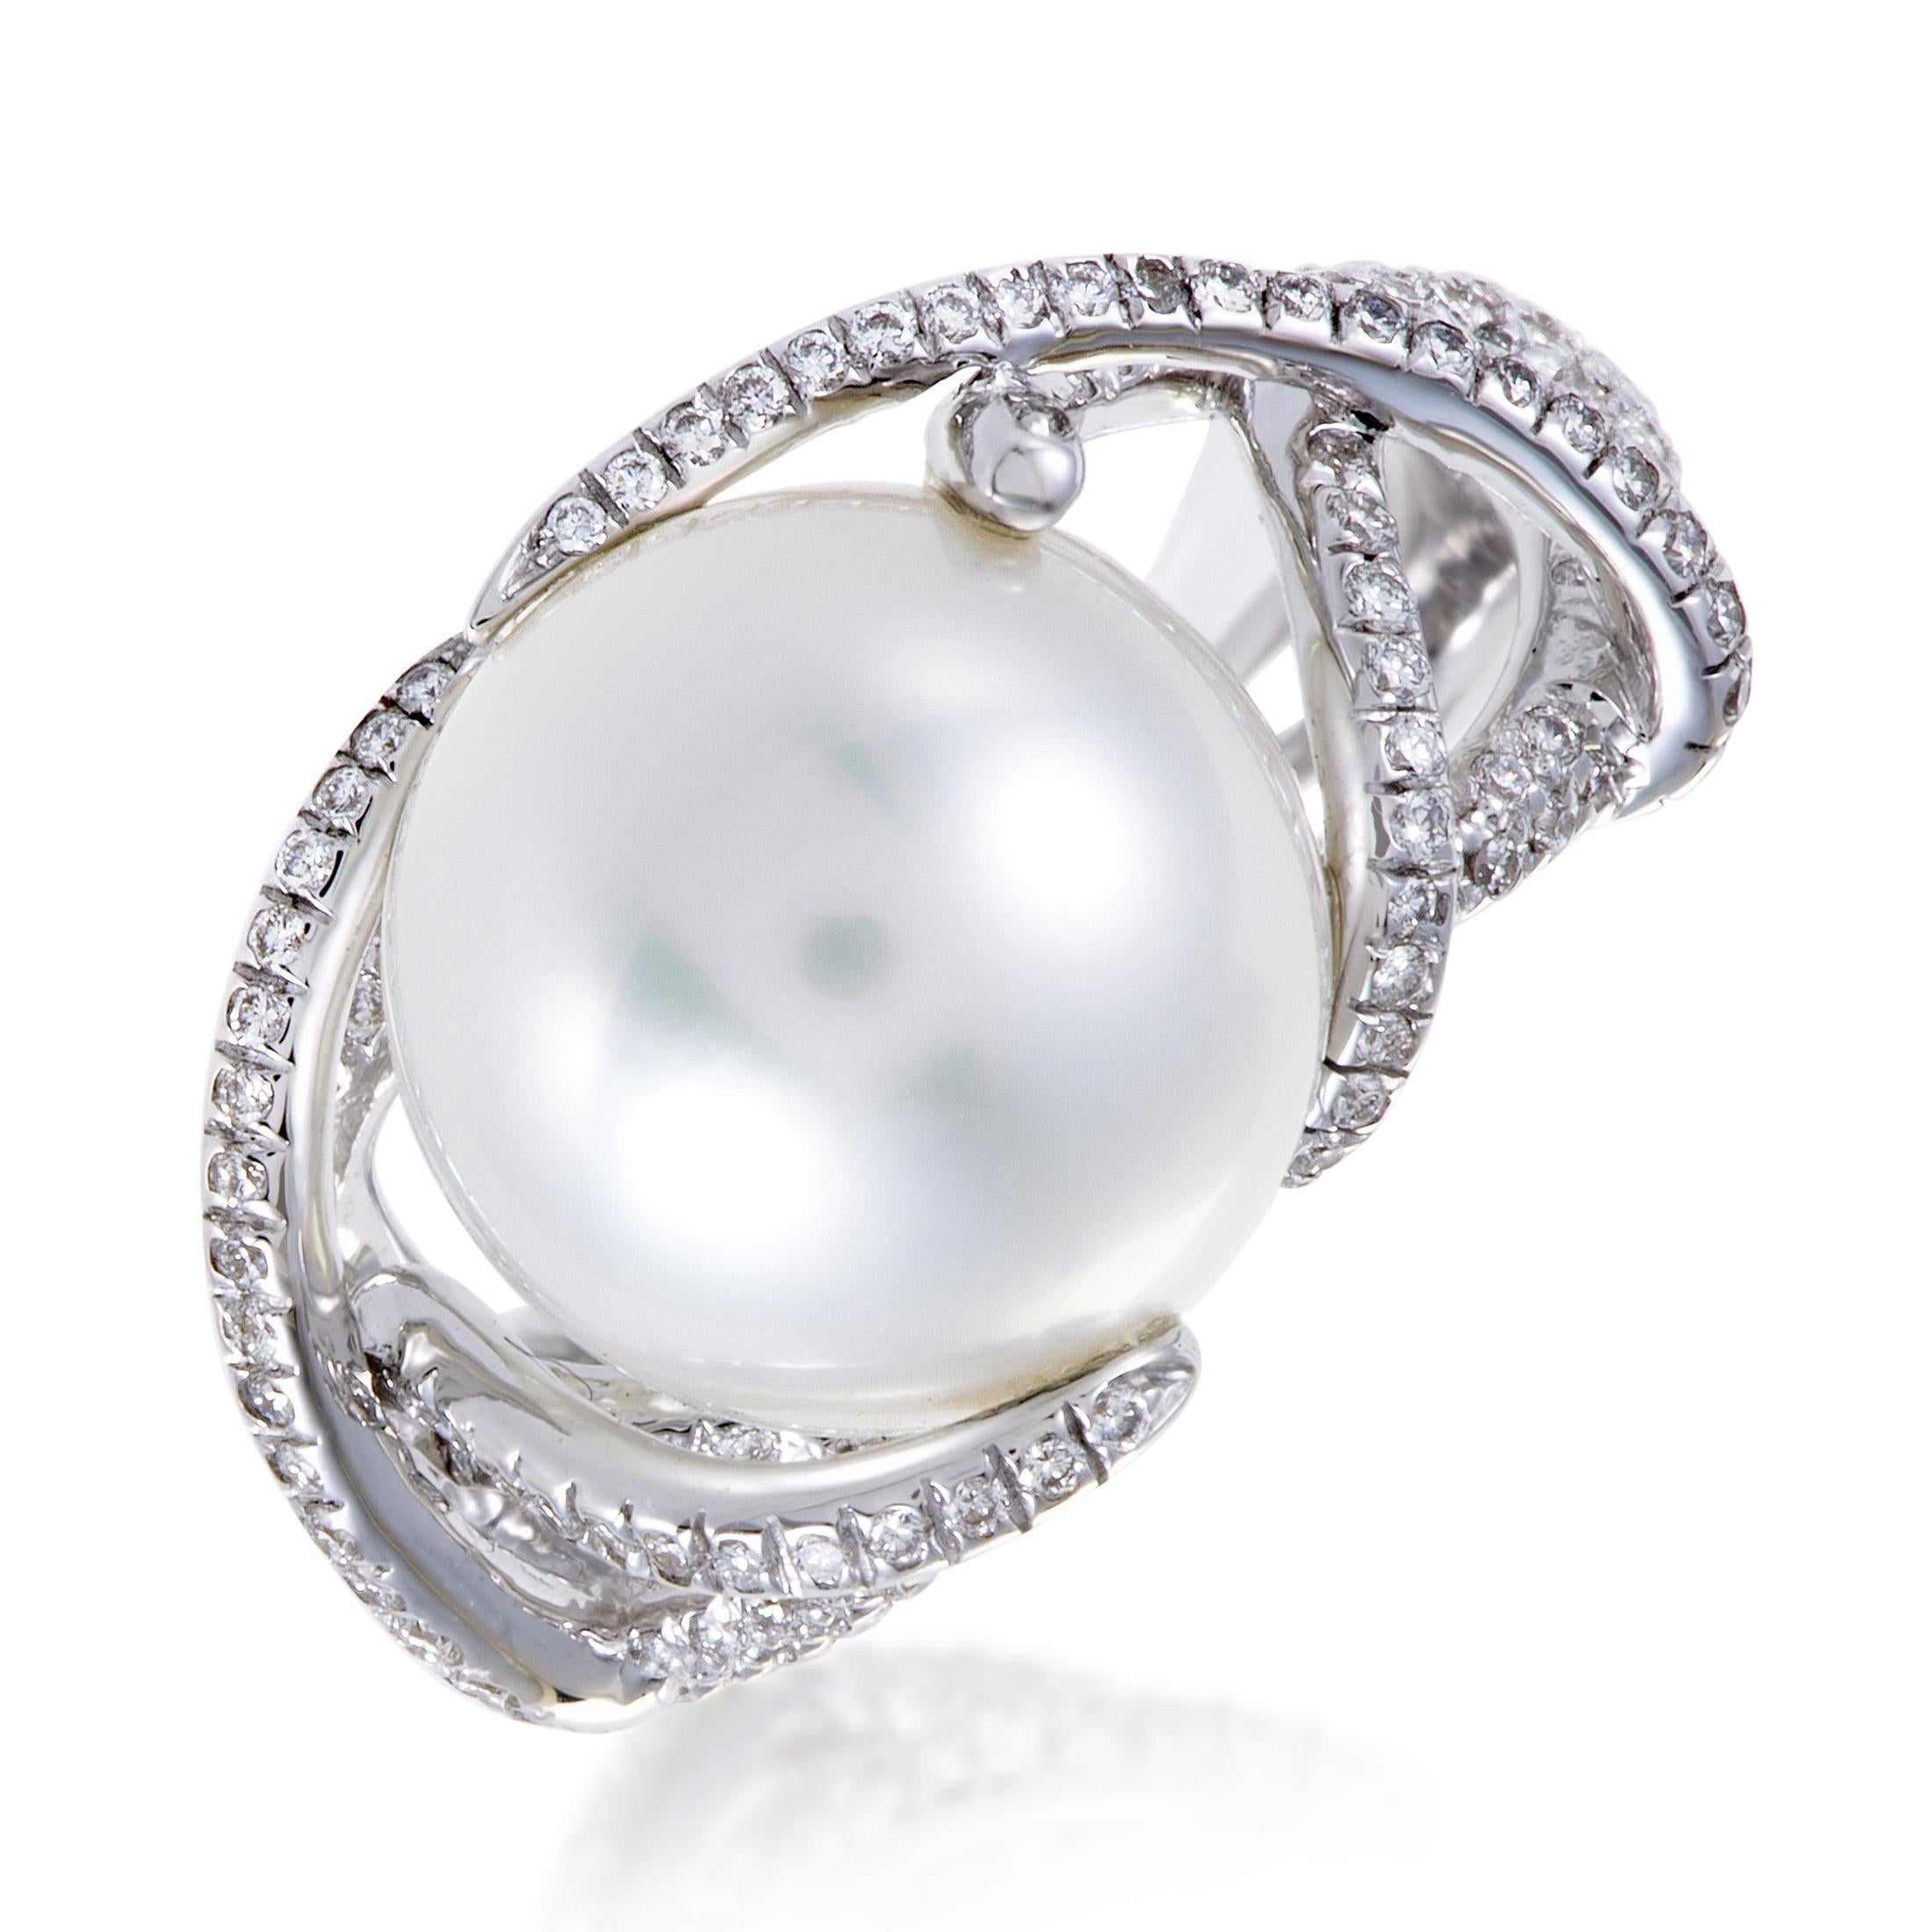 Interplaying in a wonderful manner and gracefully slithering towards and around the angelic pearl, slim strings of 18K white gold are embellished with glistening diamonds weighing in total 0.51ct in this magnificent ring from Mikimoto. Ring Top